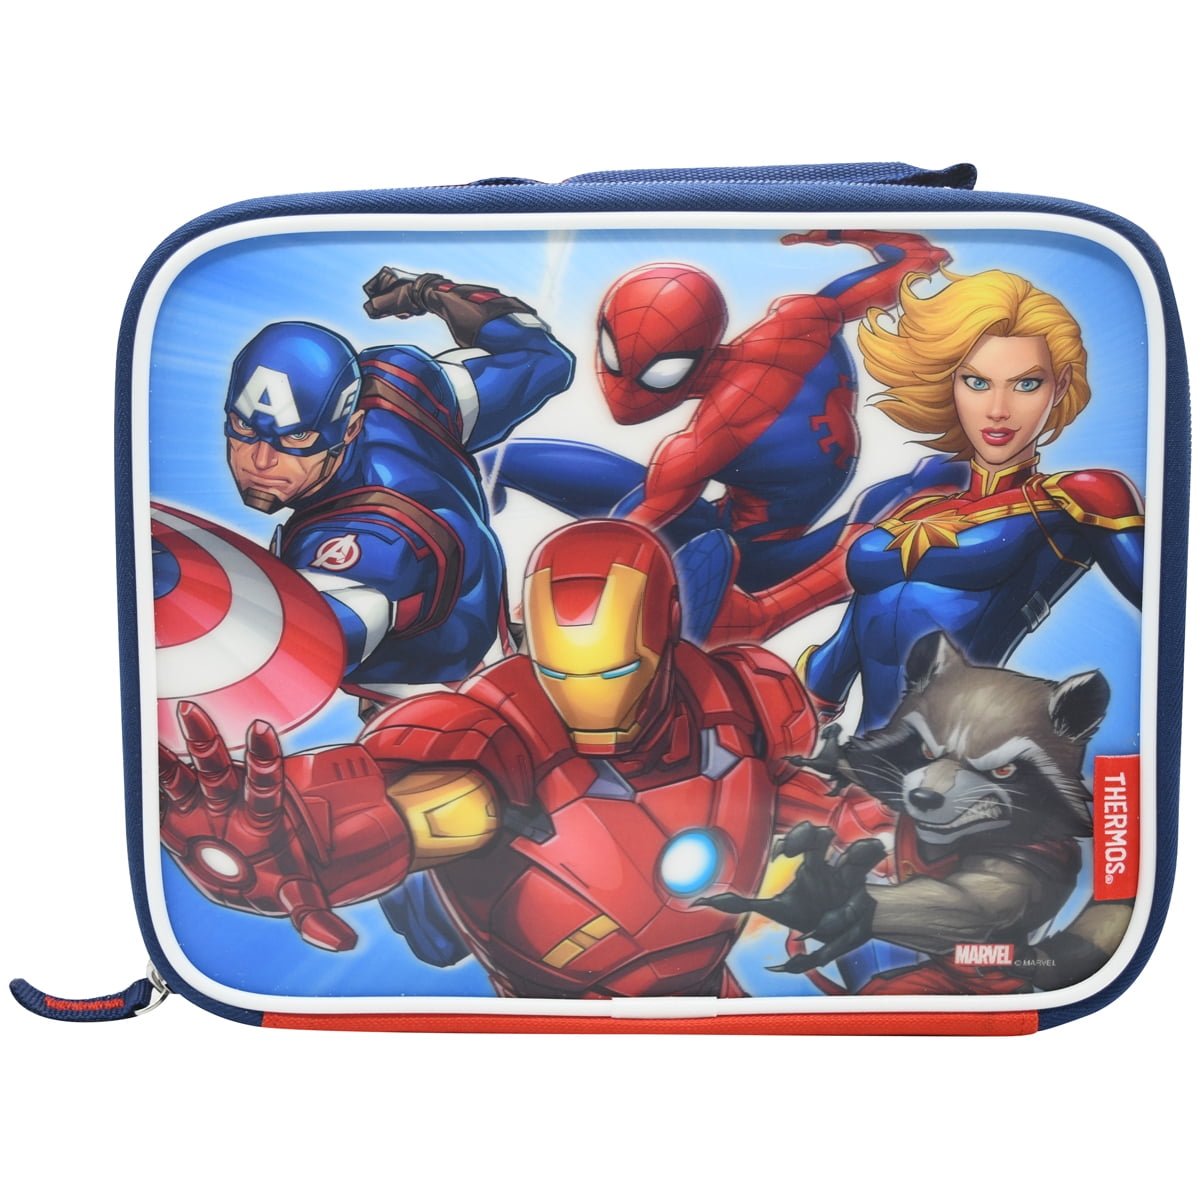 Thermos Kids' Soft Lunch Kit/Insulated Lunch Box,PAW PATROL GIRL, 2021  Edition, Back to School 